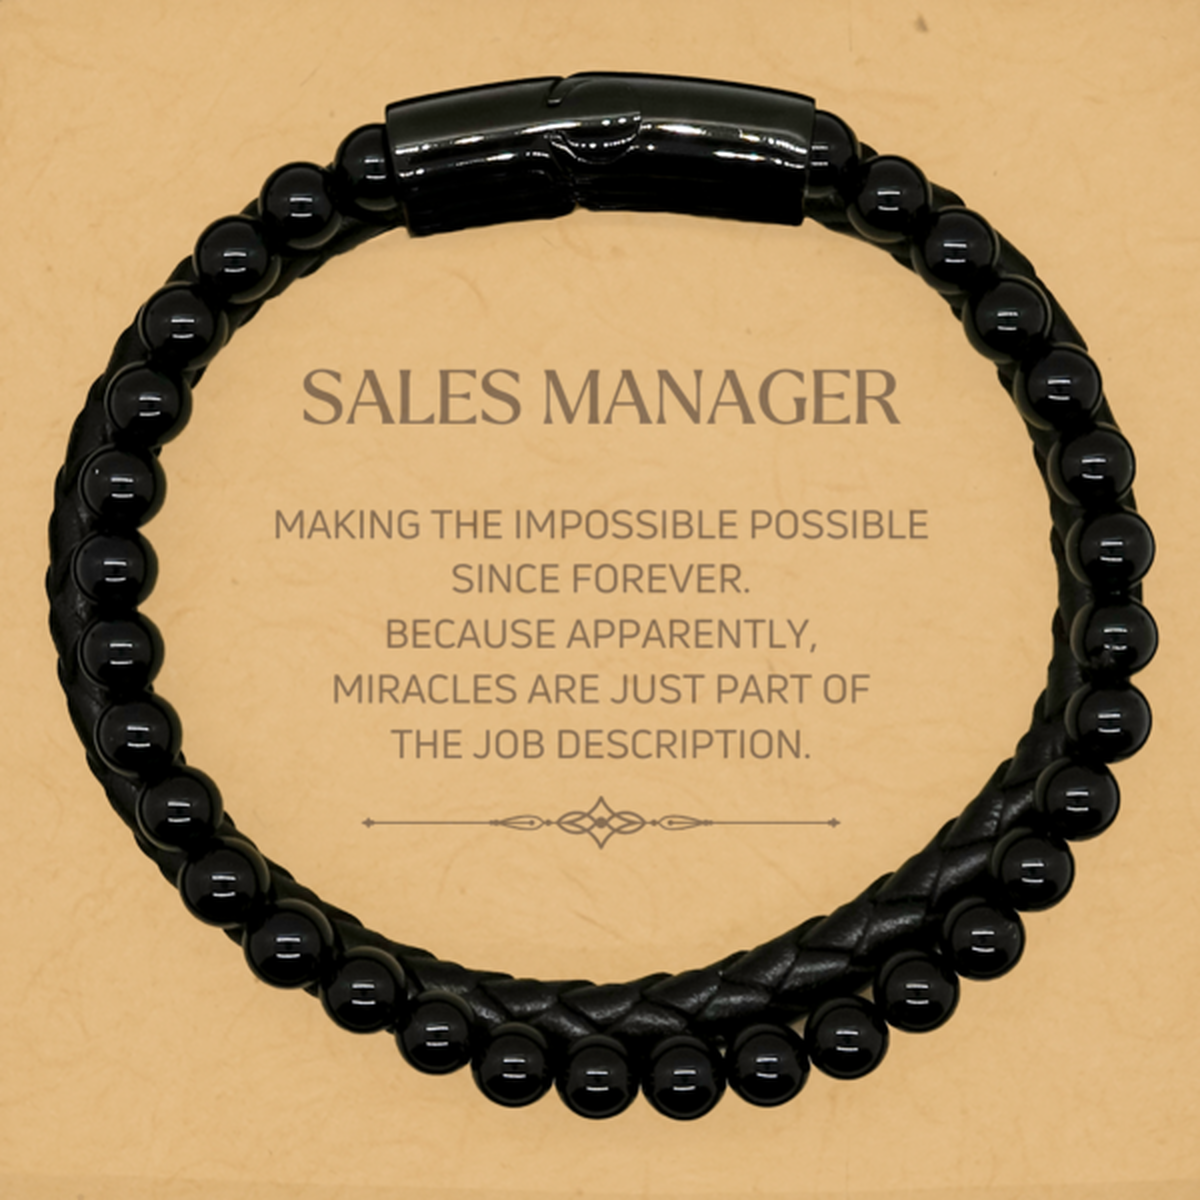 Funny Sales Manager Gifts, Miracles are just part of the job description, Inspirational Birthday Stone Leather Bracelets For Sales Manager, Men, Women, Coworkers, Friends, Boss